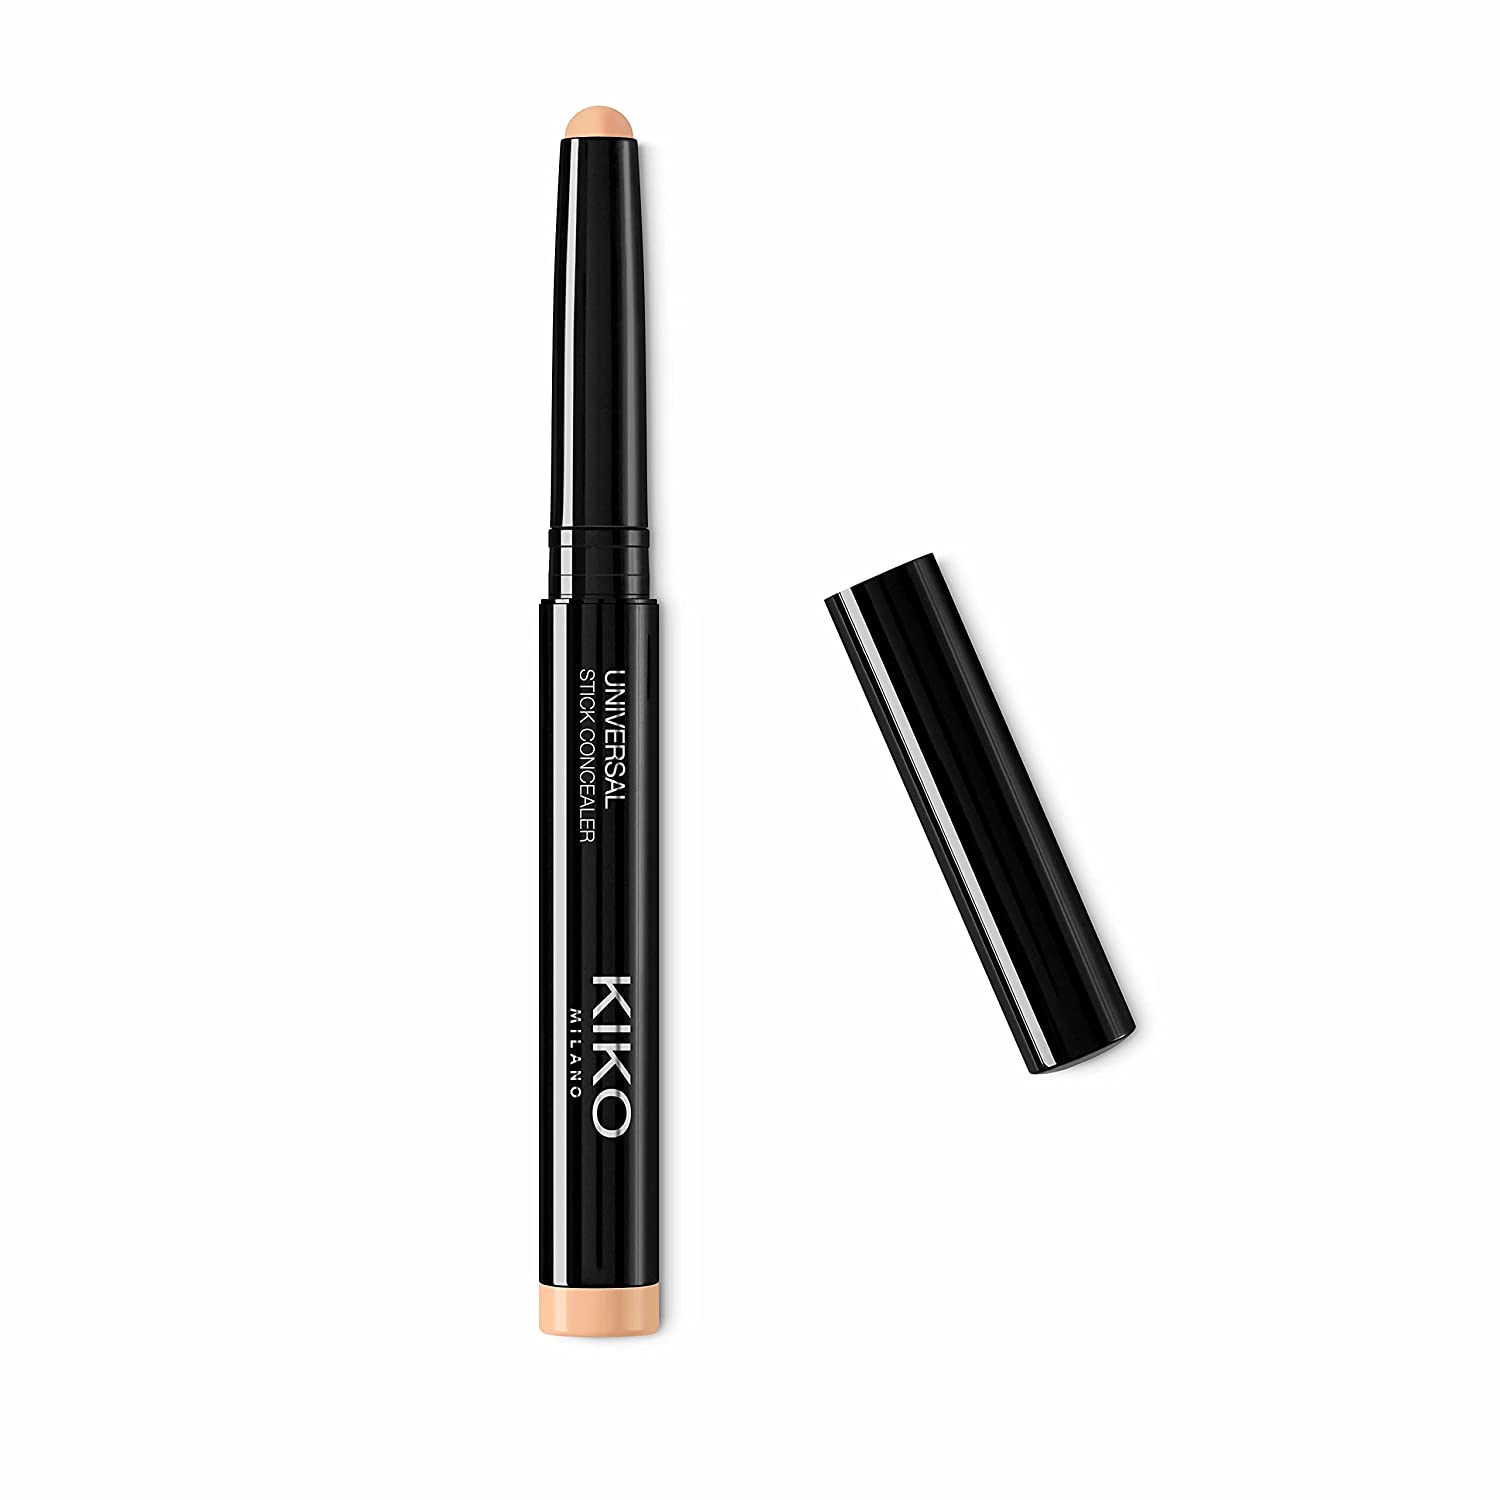 KIKO Milano Universal Stick Concealer 06, Creamy Concealer in Stick Shape, Product with Long Lasting Up to 24 Hours, warm ‎06 beige